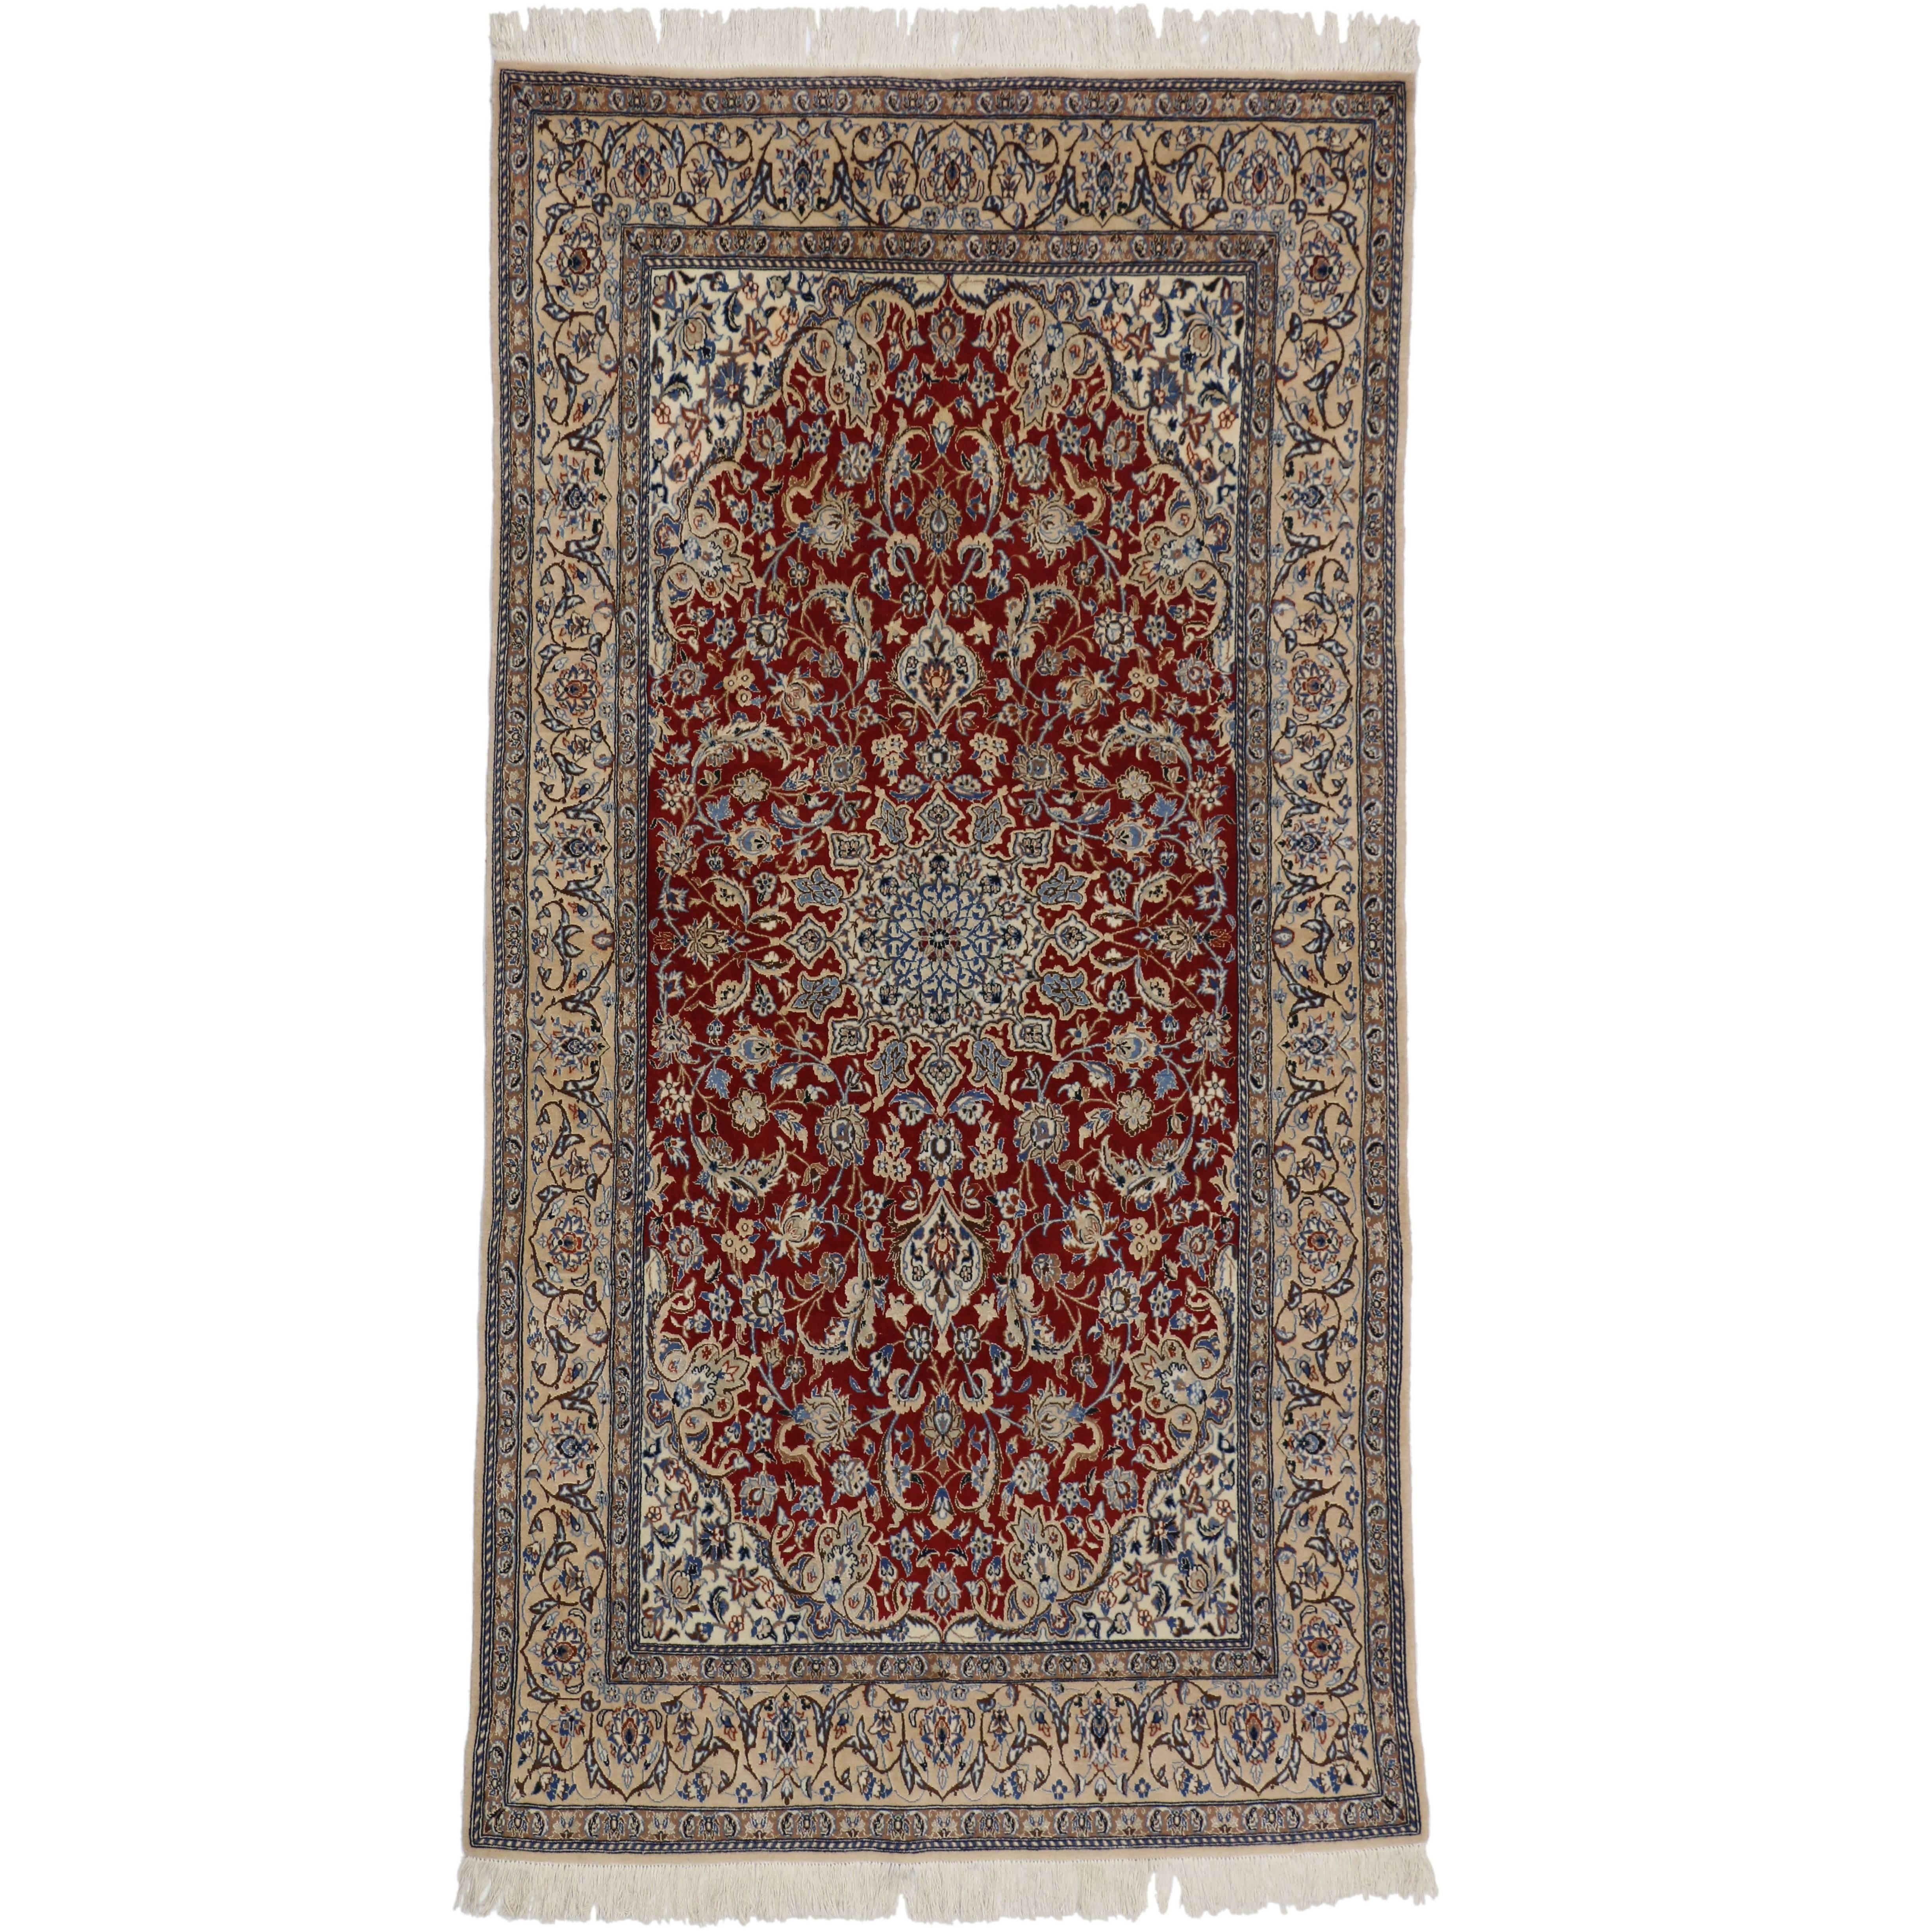 Tapis persan Nain vintage de style traditionnel